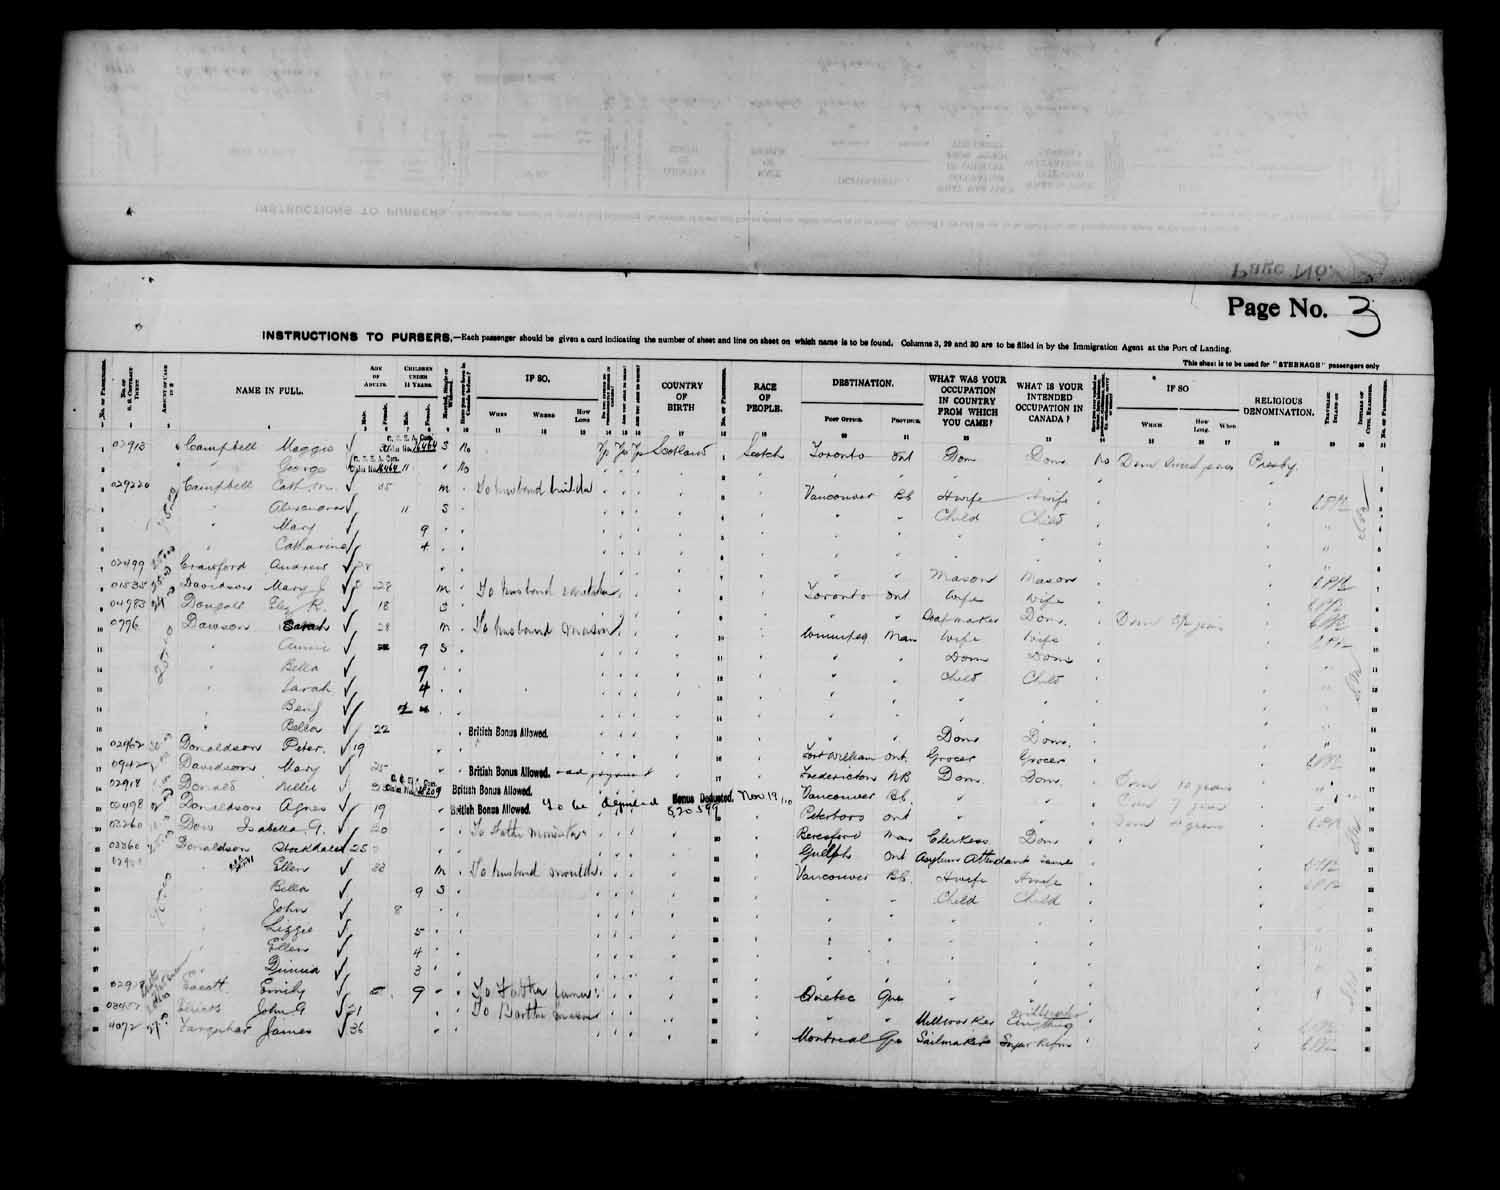 Digitized page of Passenger Lists for Image No.: e003566522